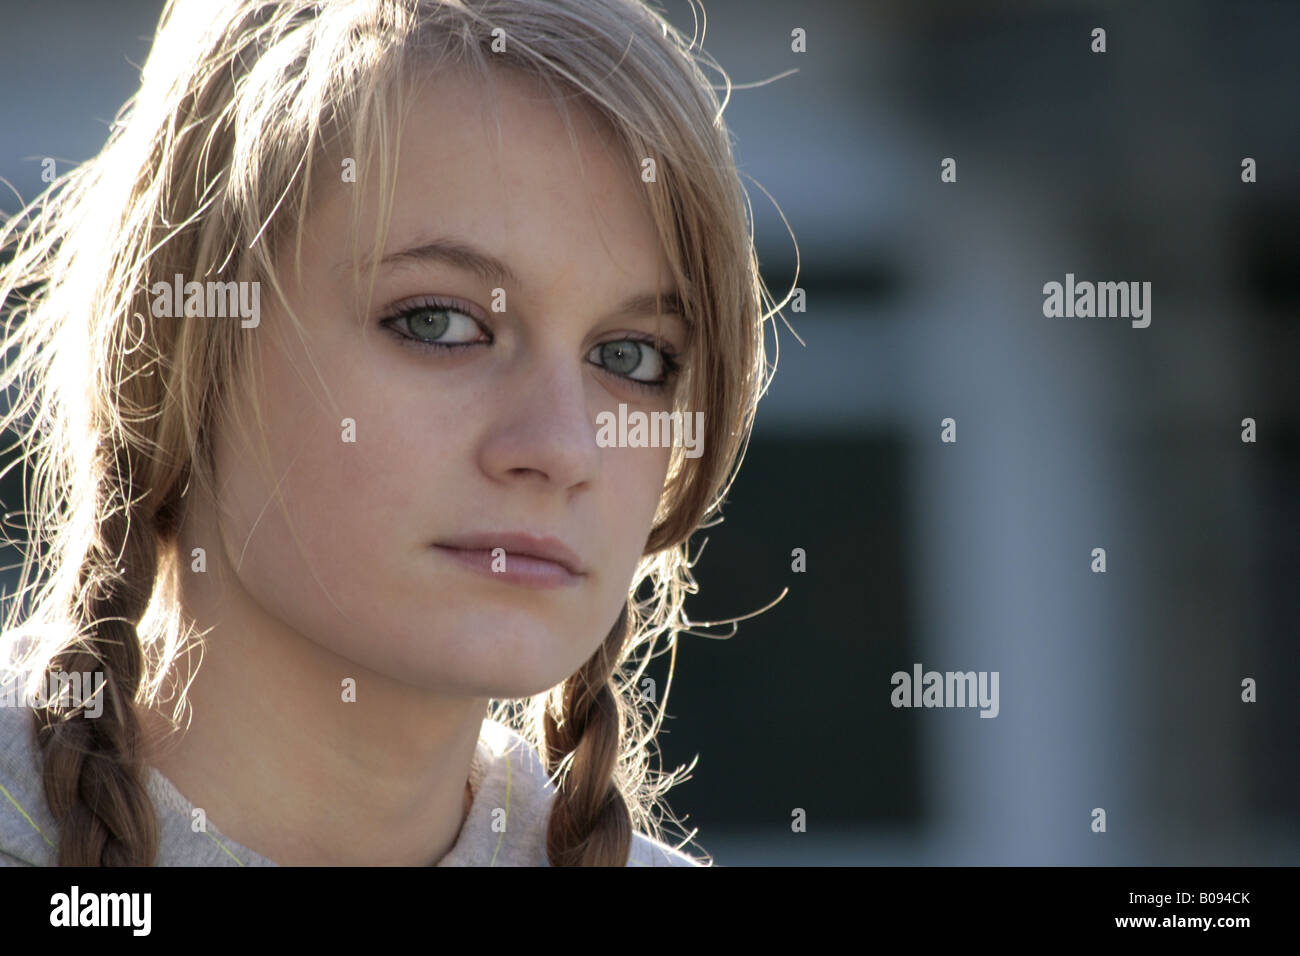 girl in thought, Germany Stock Photo